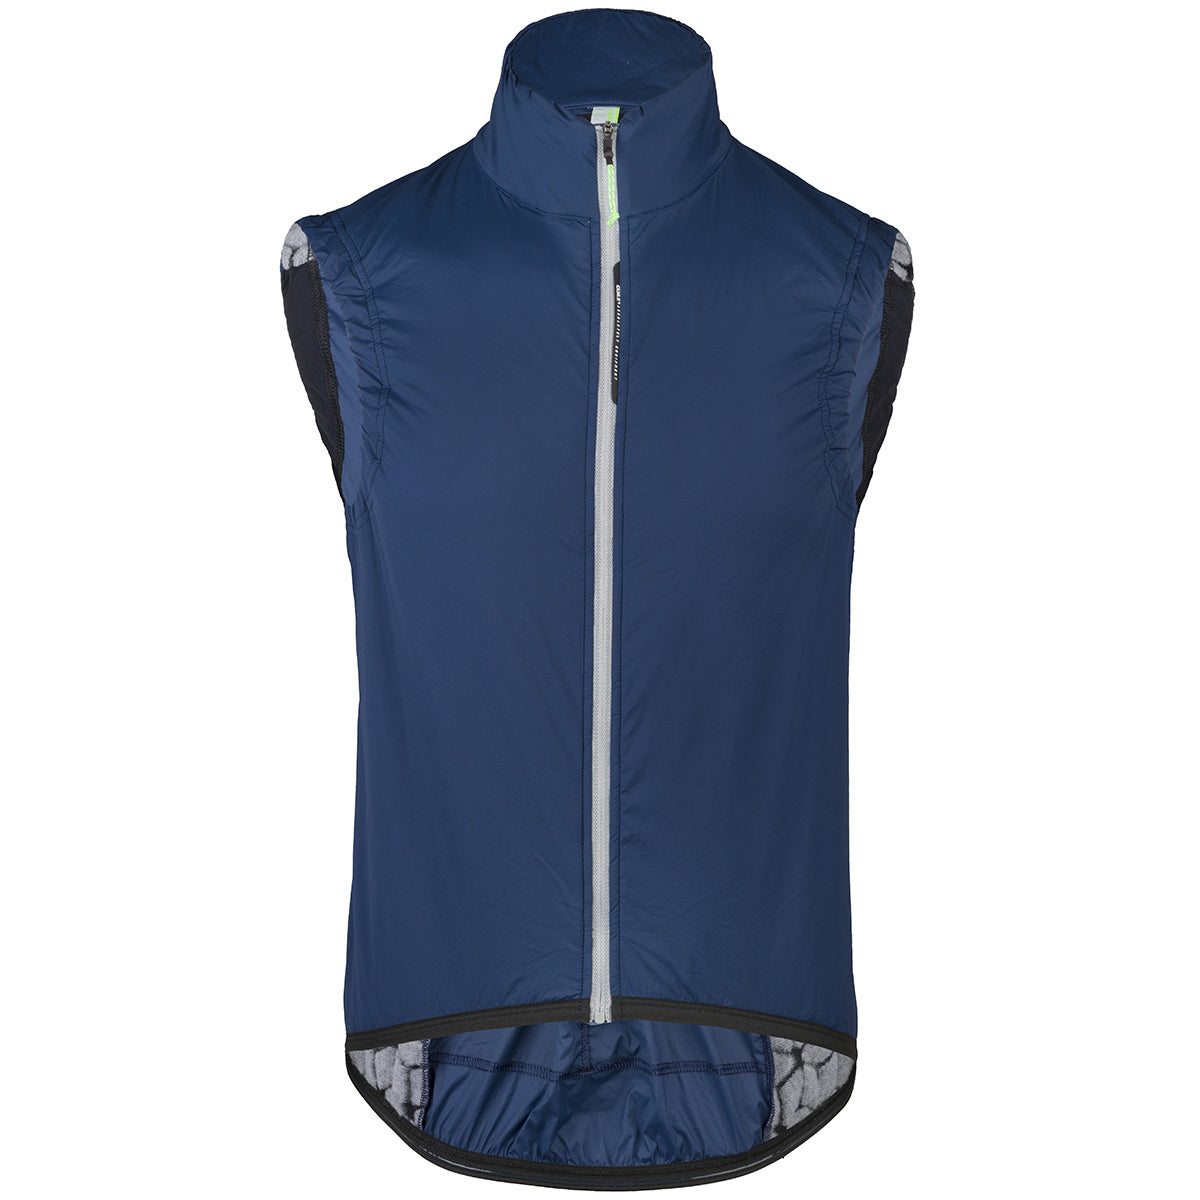 Q36.5 Adventure Insulation wind vest - Blue | All4cycling